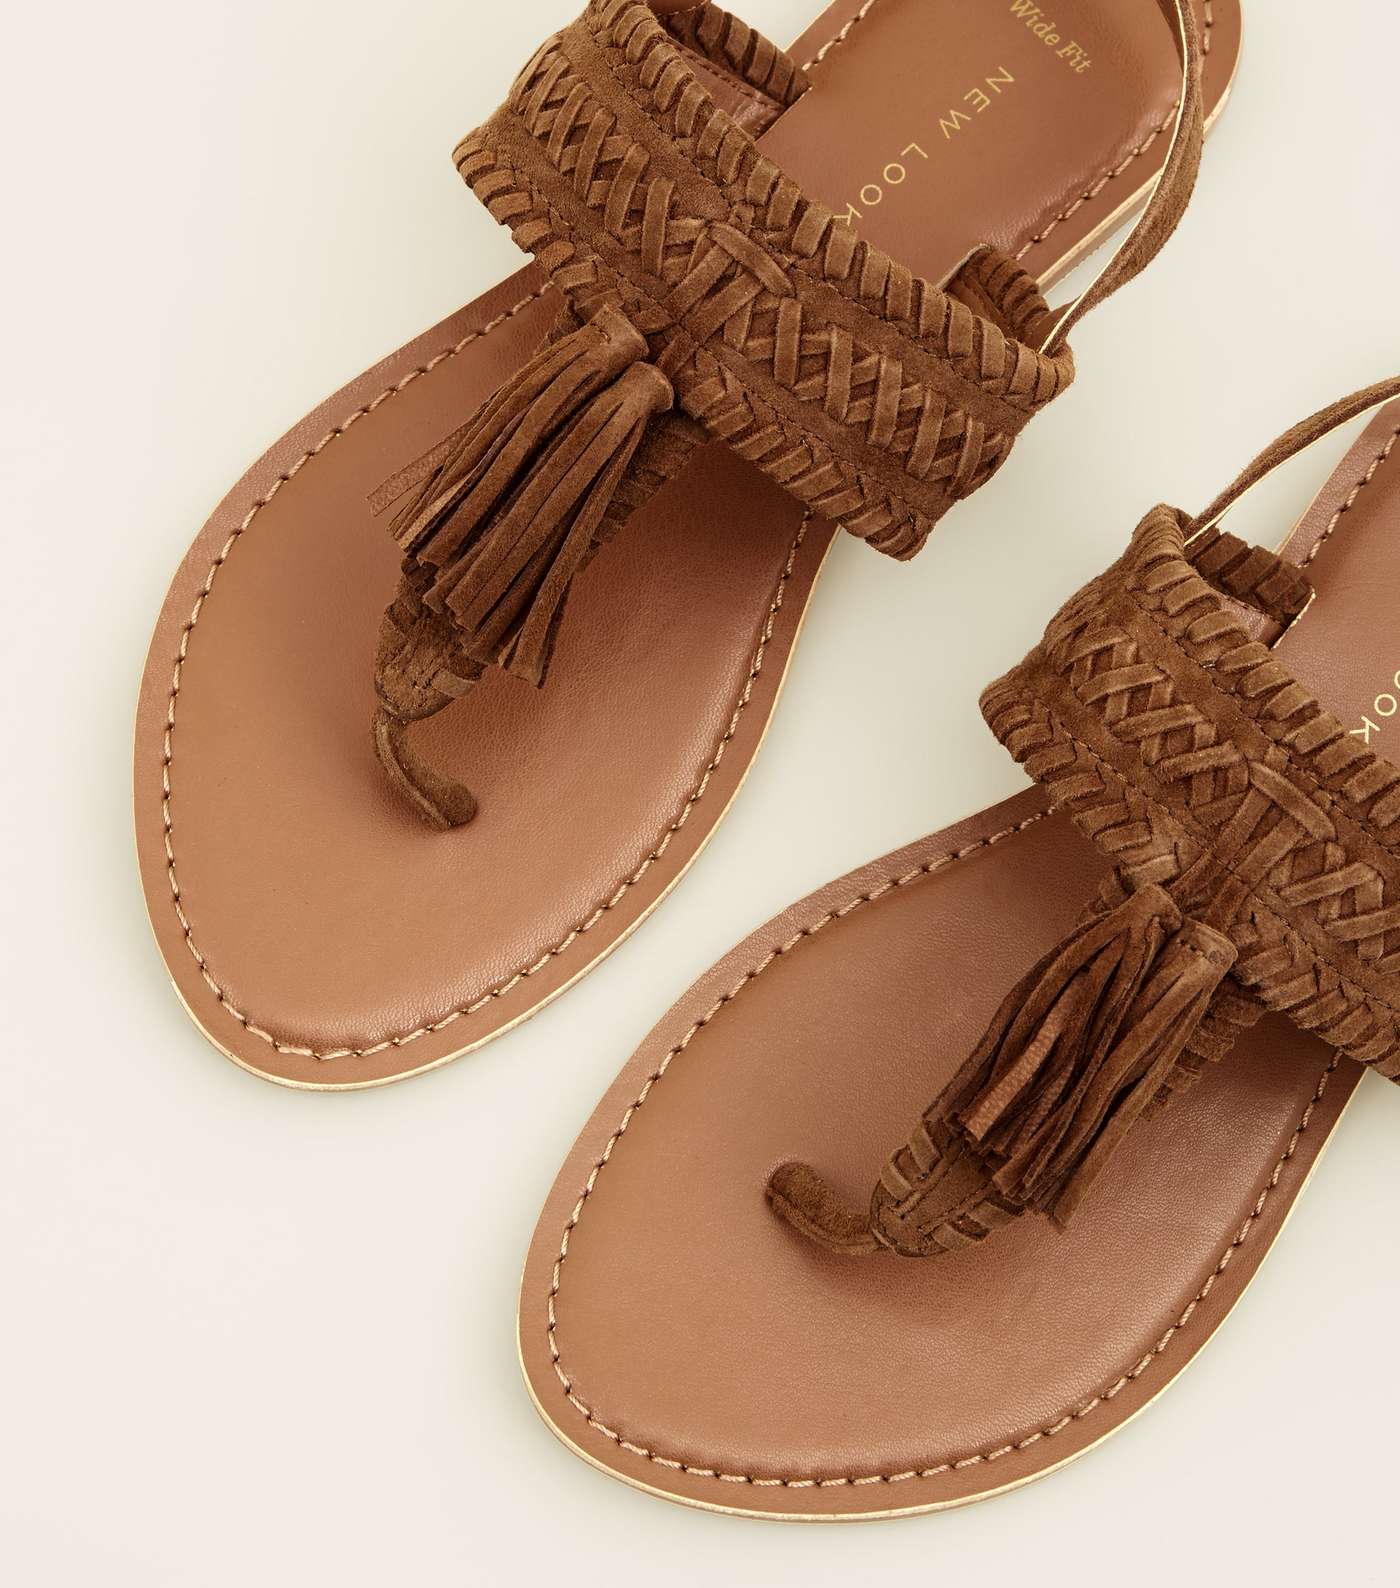 Wide Fit Tan Suede Tassel Woven Strap Sandals Image 3